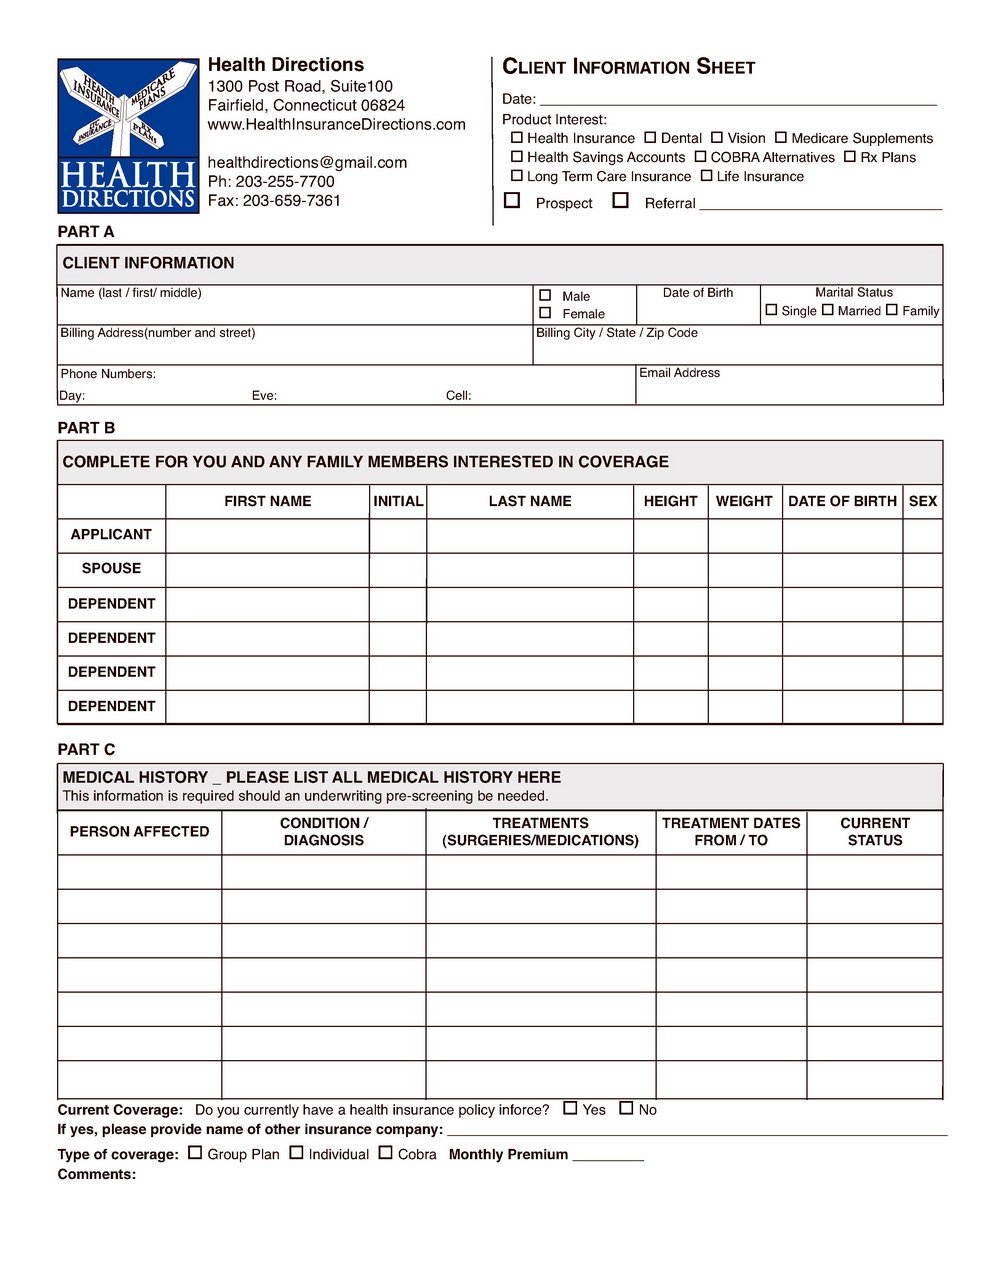 Fake Std Test Results Form Forms 6993